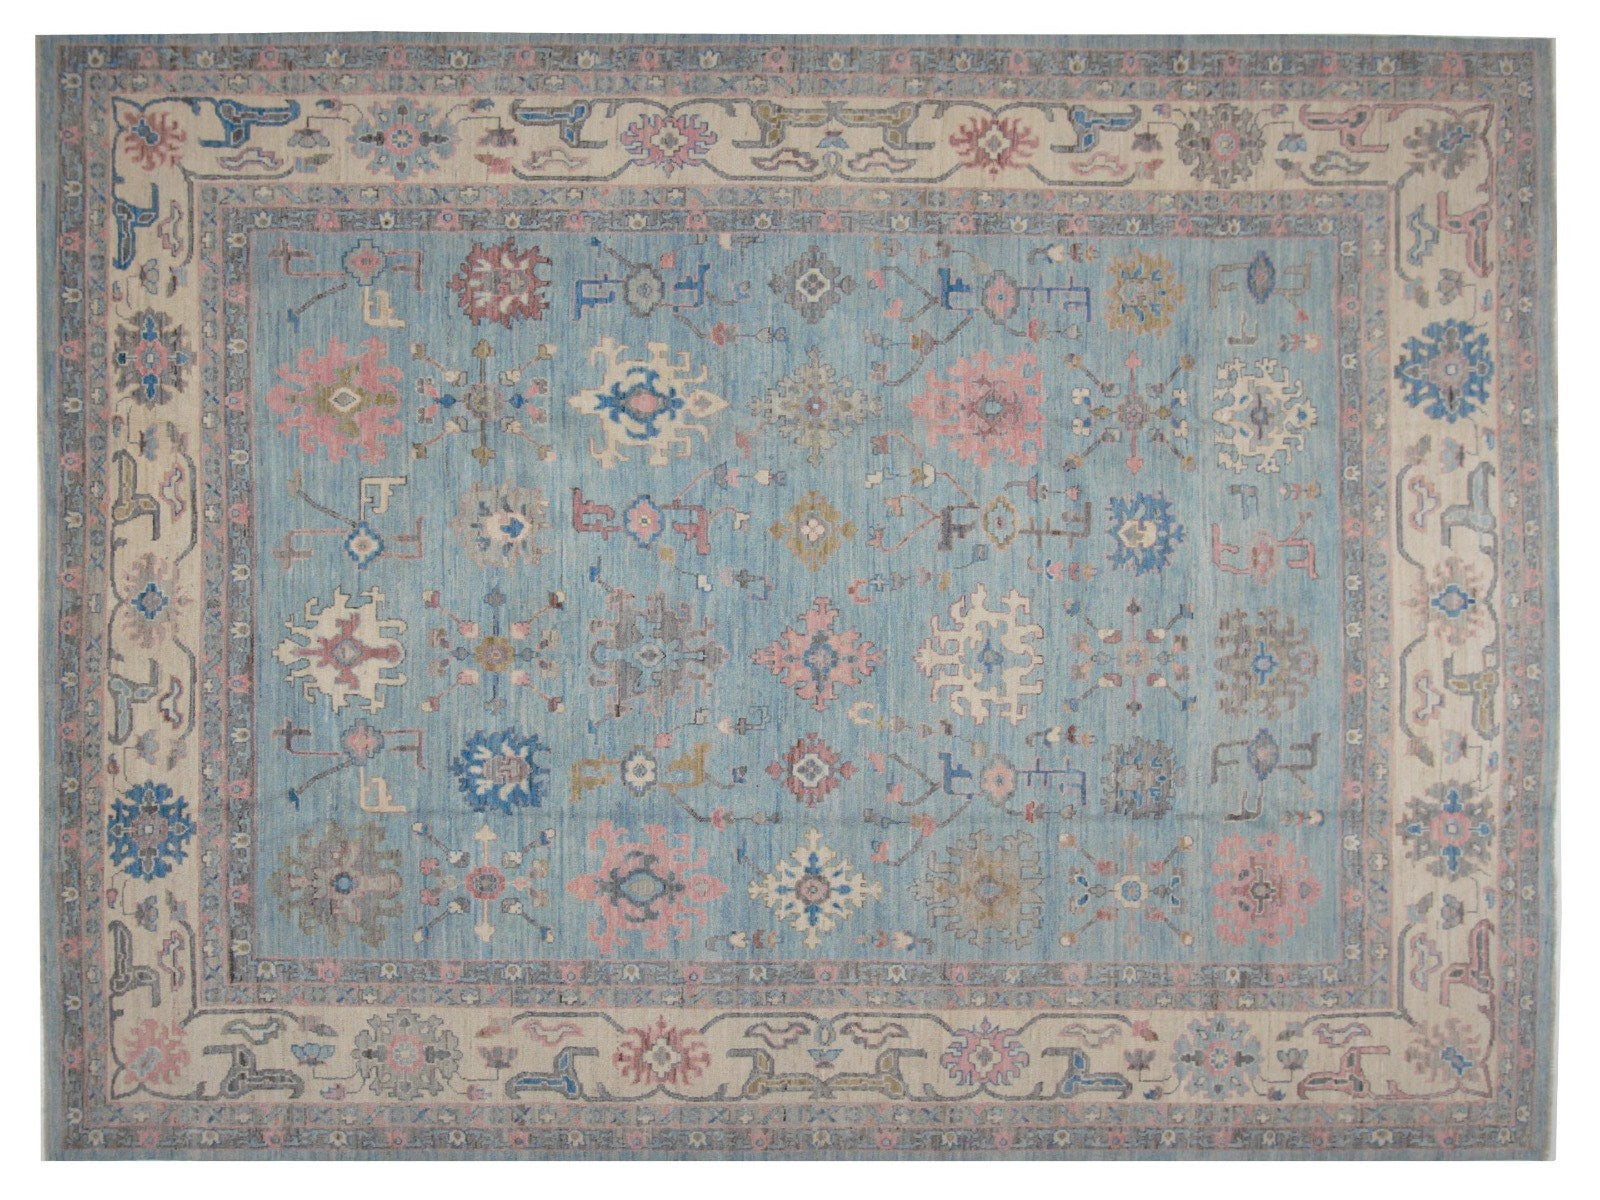 Vibrant Turkish Oushak rug featuring a light blue base adorned with colorful motifs in pink, dark blue, orange, beige, and gray.